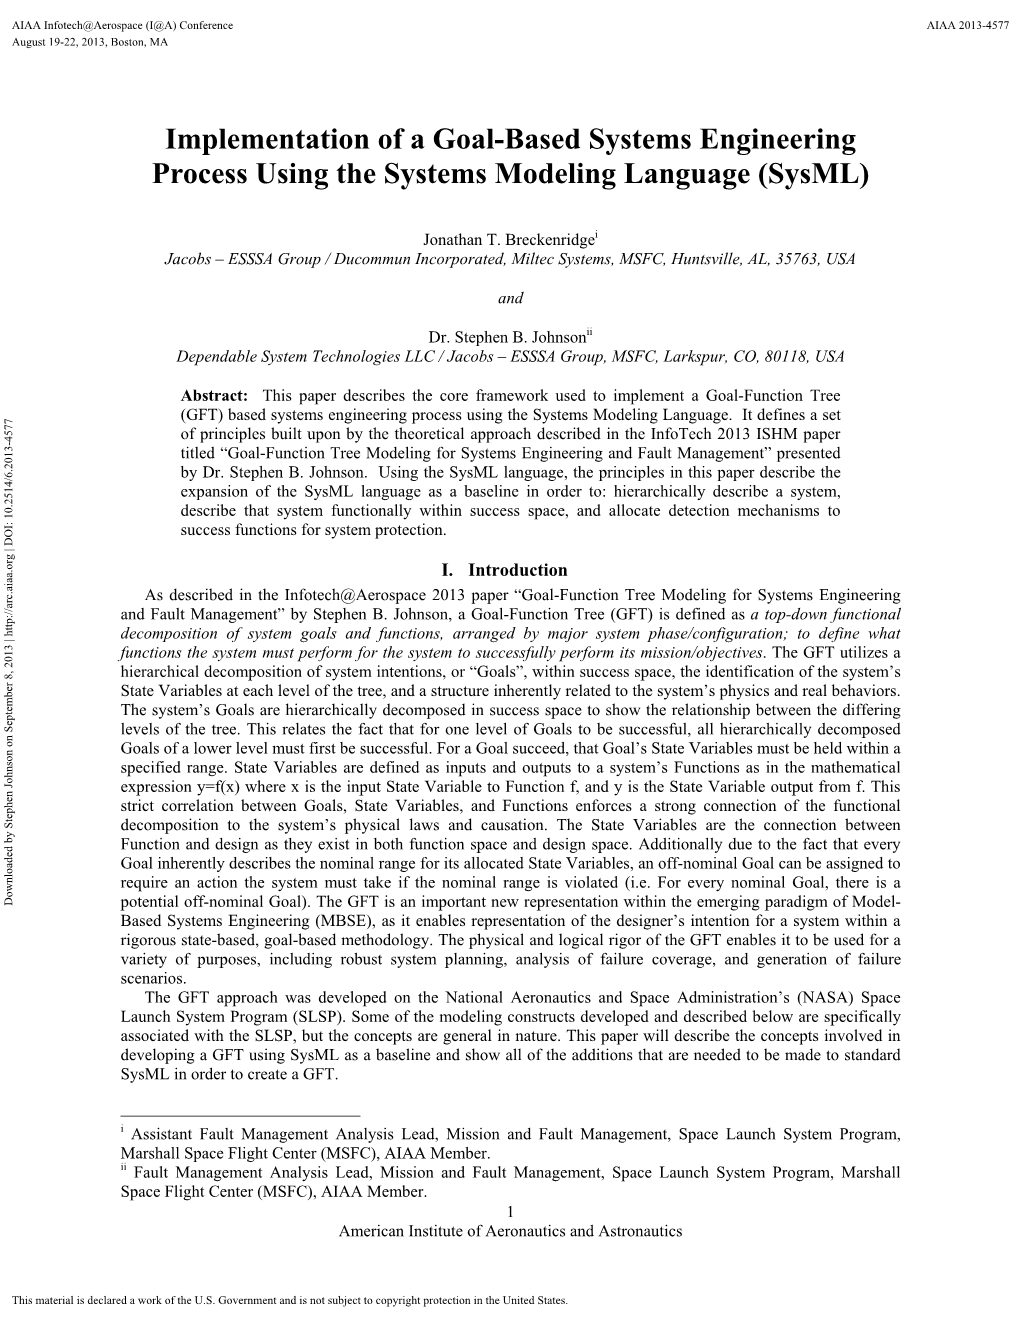 Implementation of a Goal-Based Systems Engineering Process Using the Systems Modeling Language (Sysml)